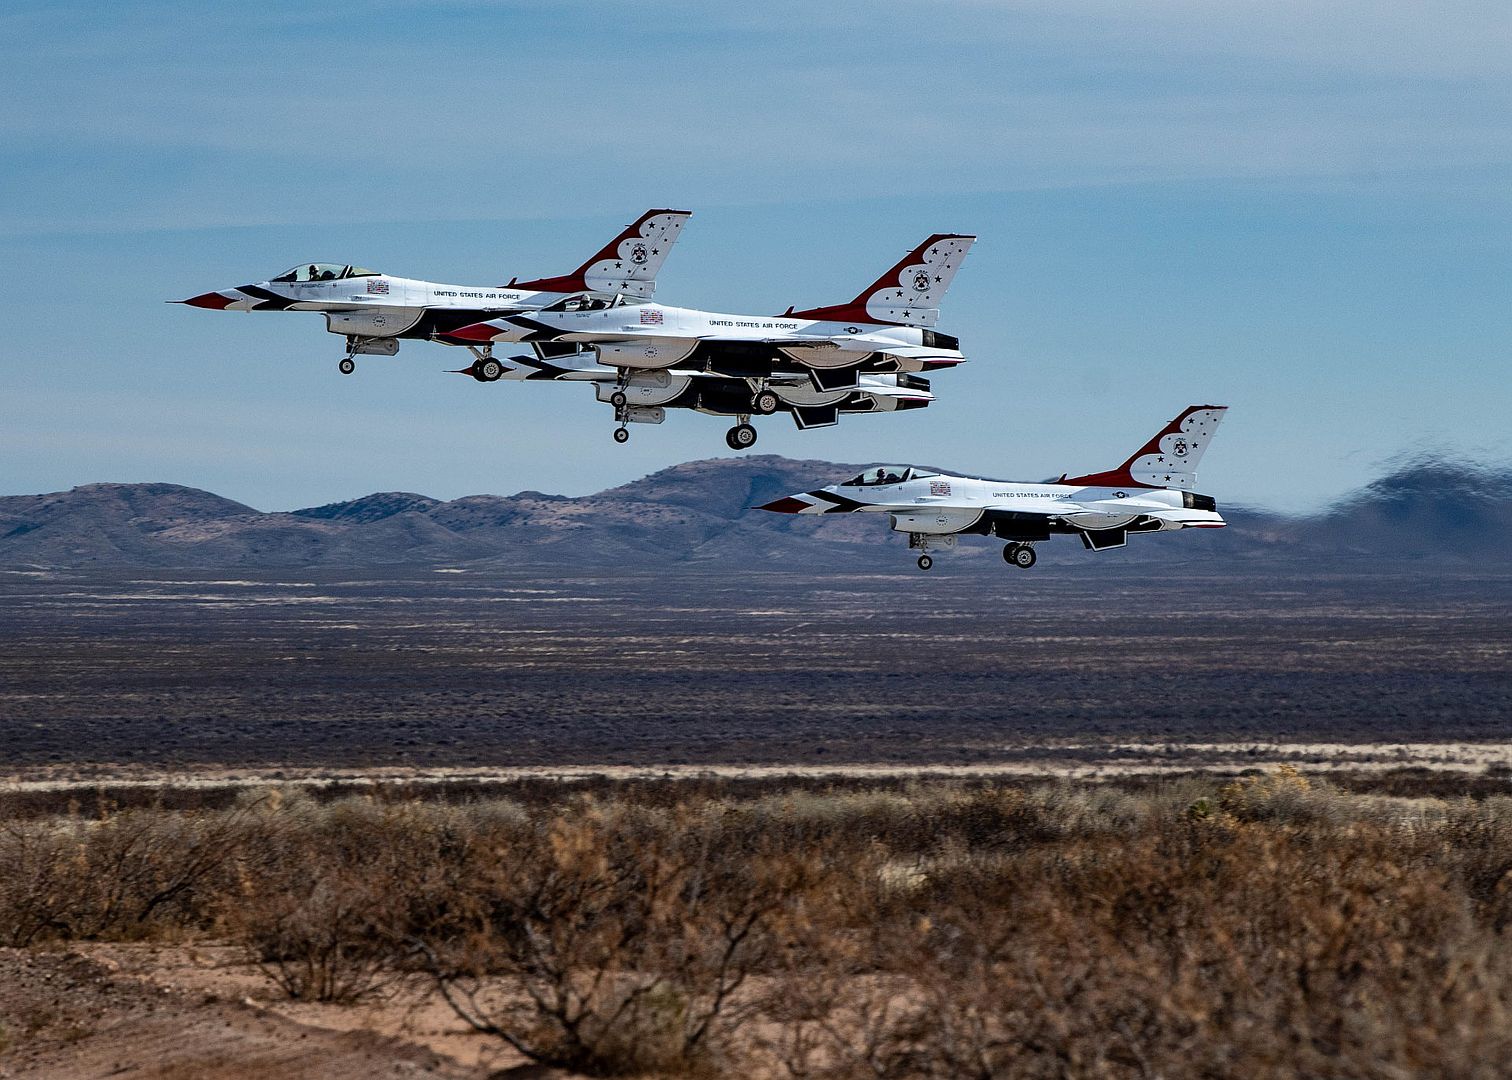 Thunderbirds Takeoff For Their First Flight During This Year S Winter Training Trip January 11 2022